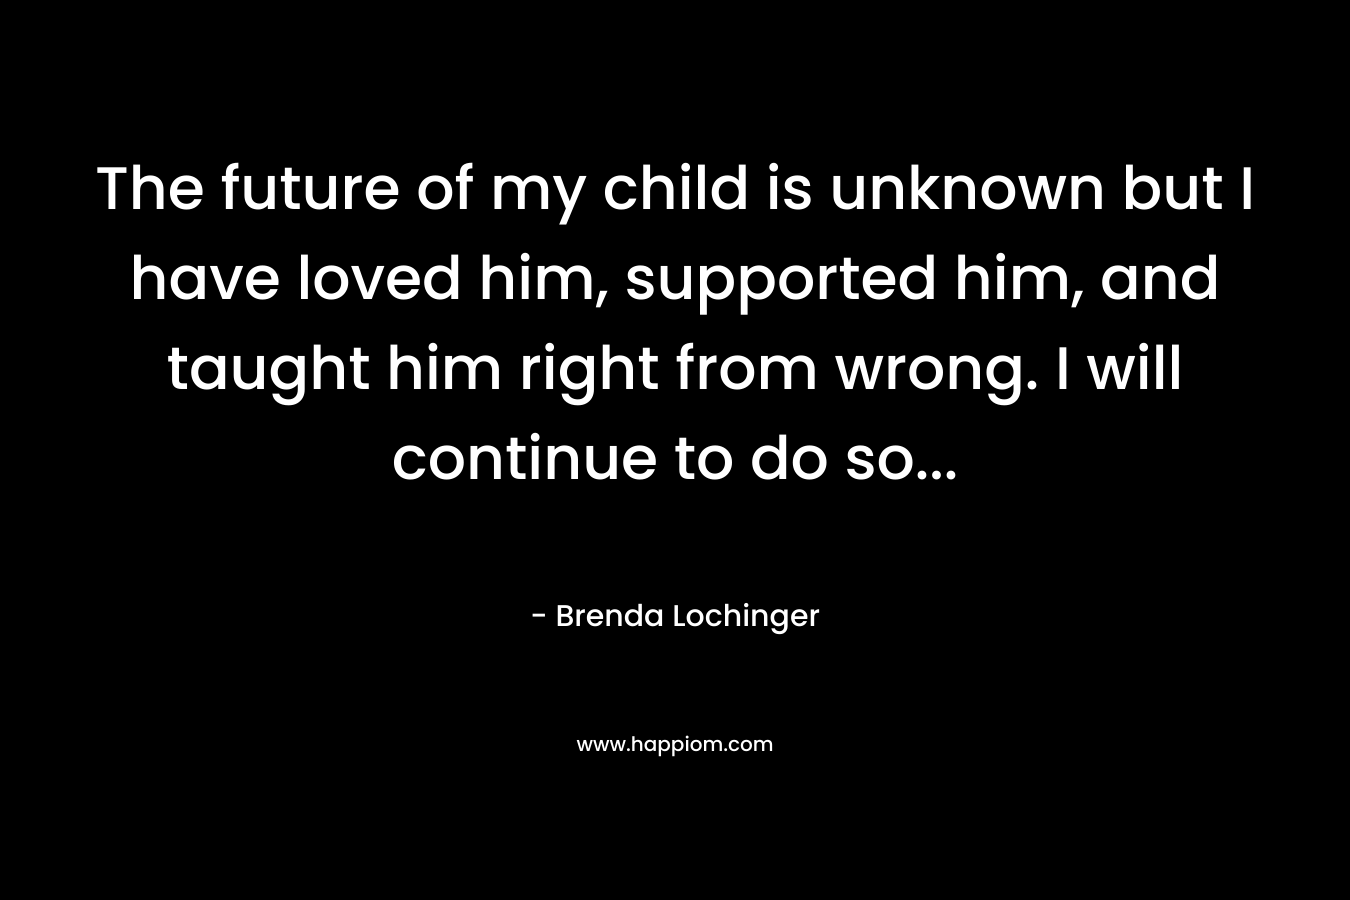 The future of my child is unknown but I have loved him, supported him, and taught him right from wrong. I will continue to do so...